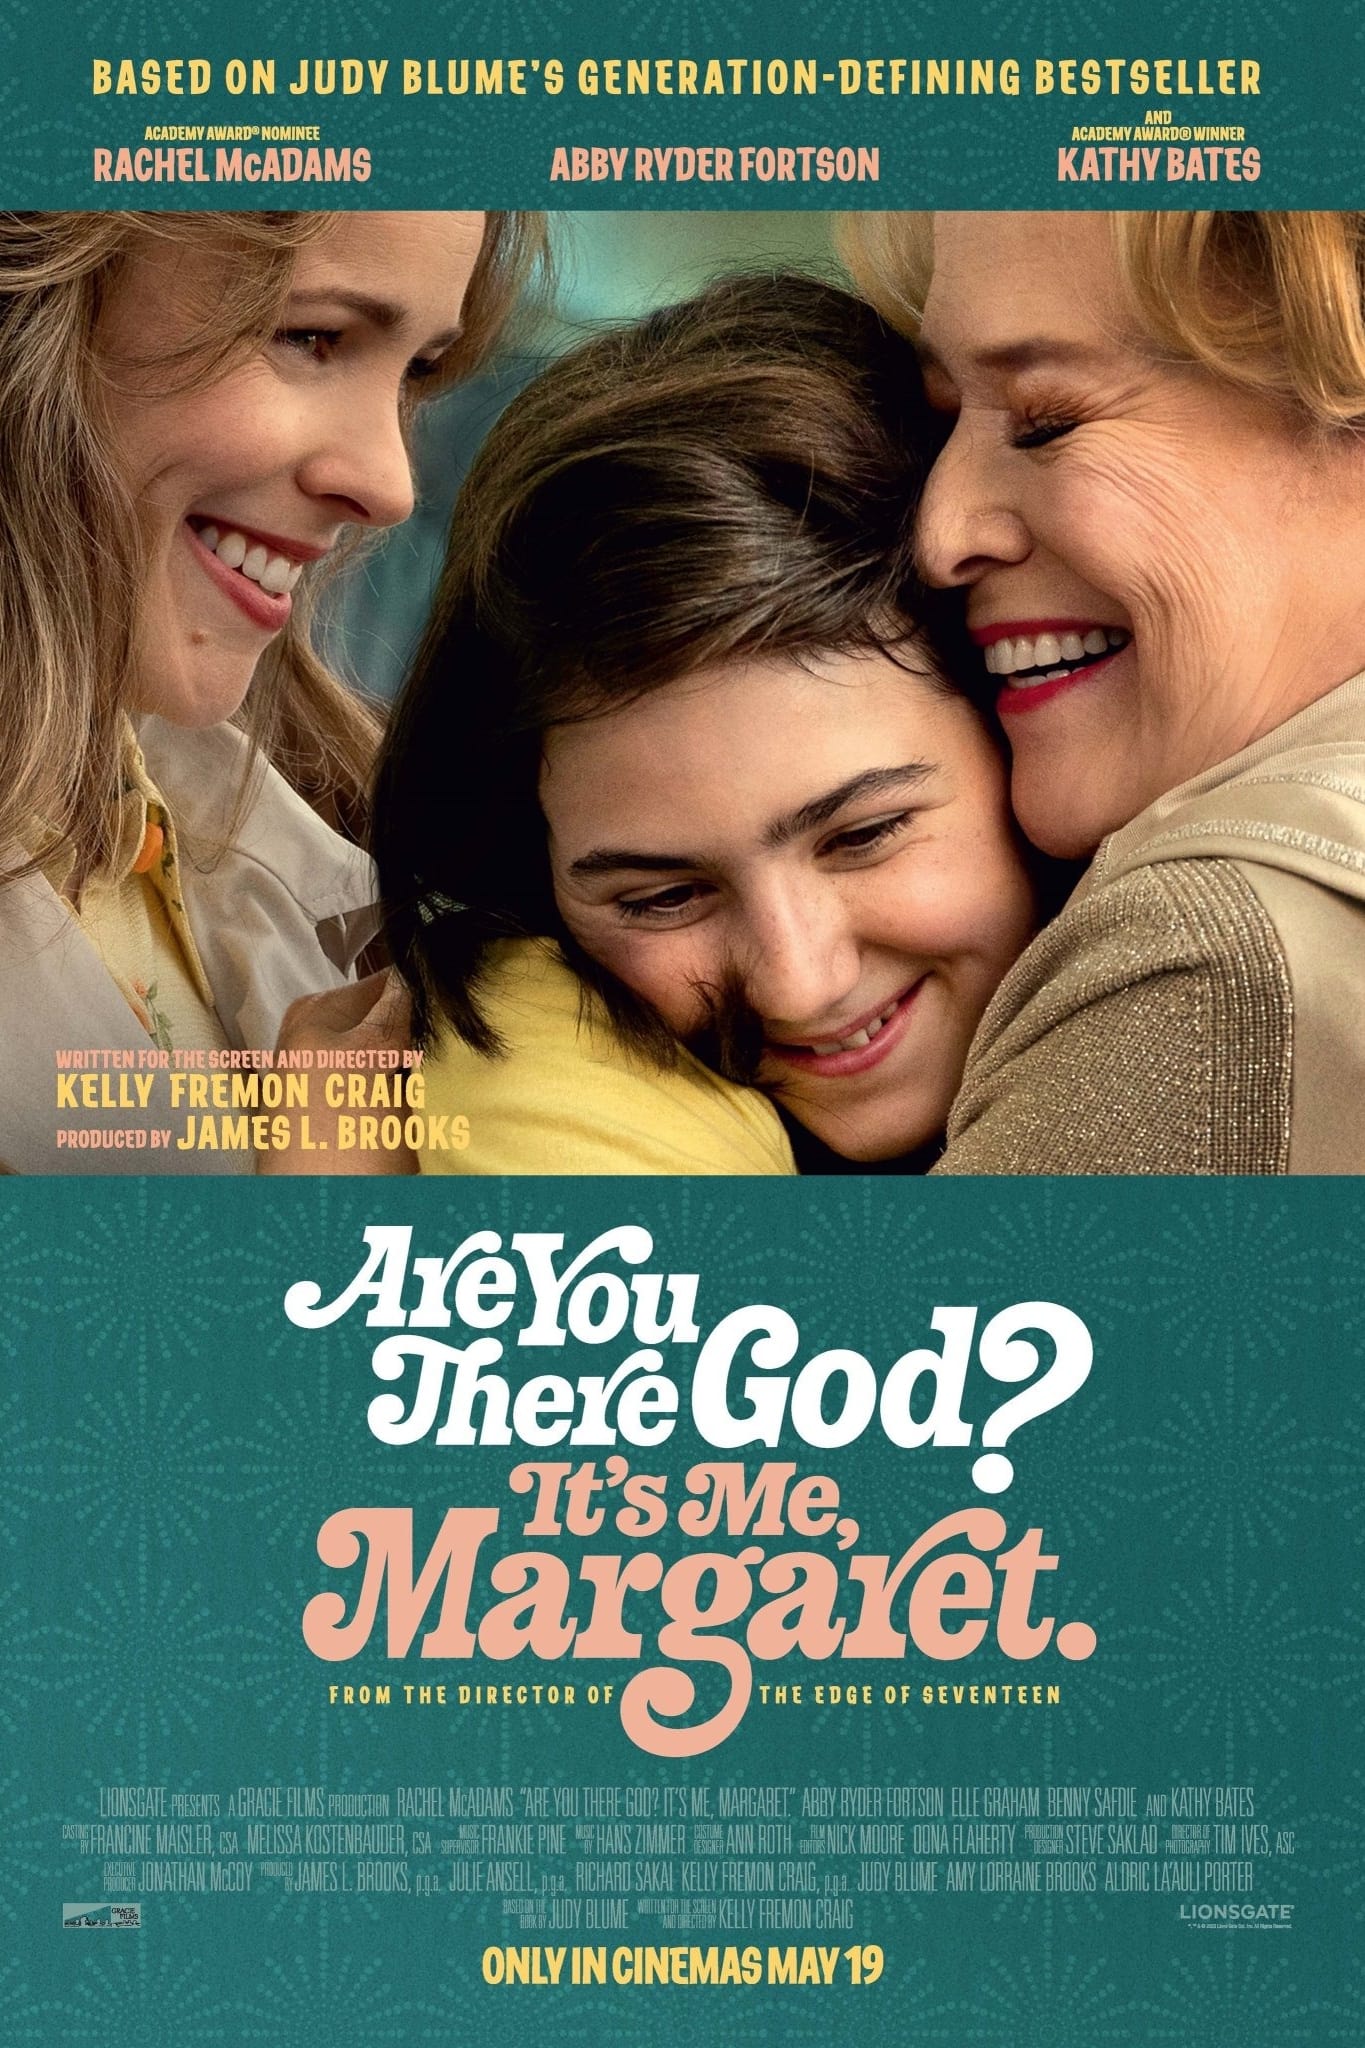 EN - Are You There God? It's Me, Margaret. (2023)